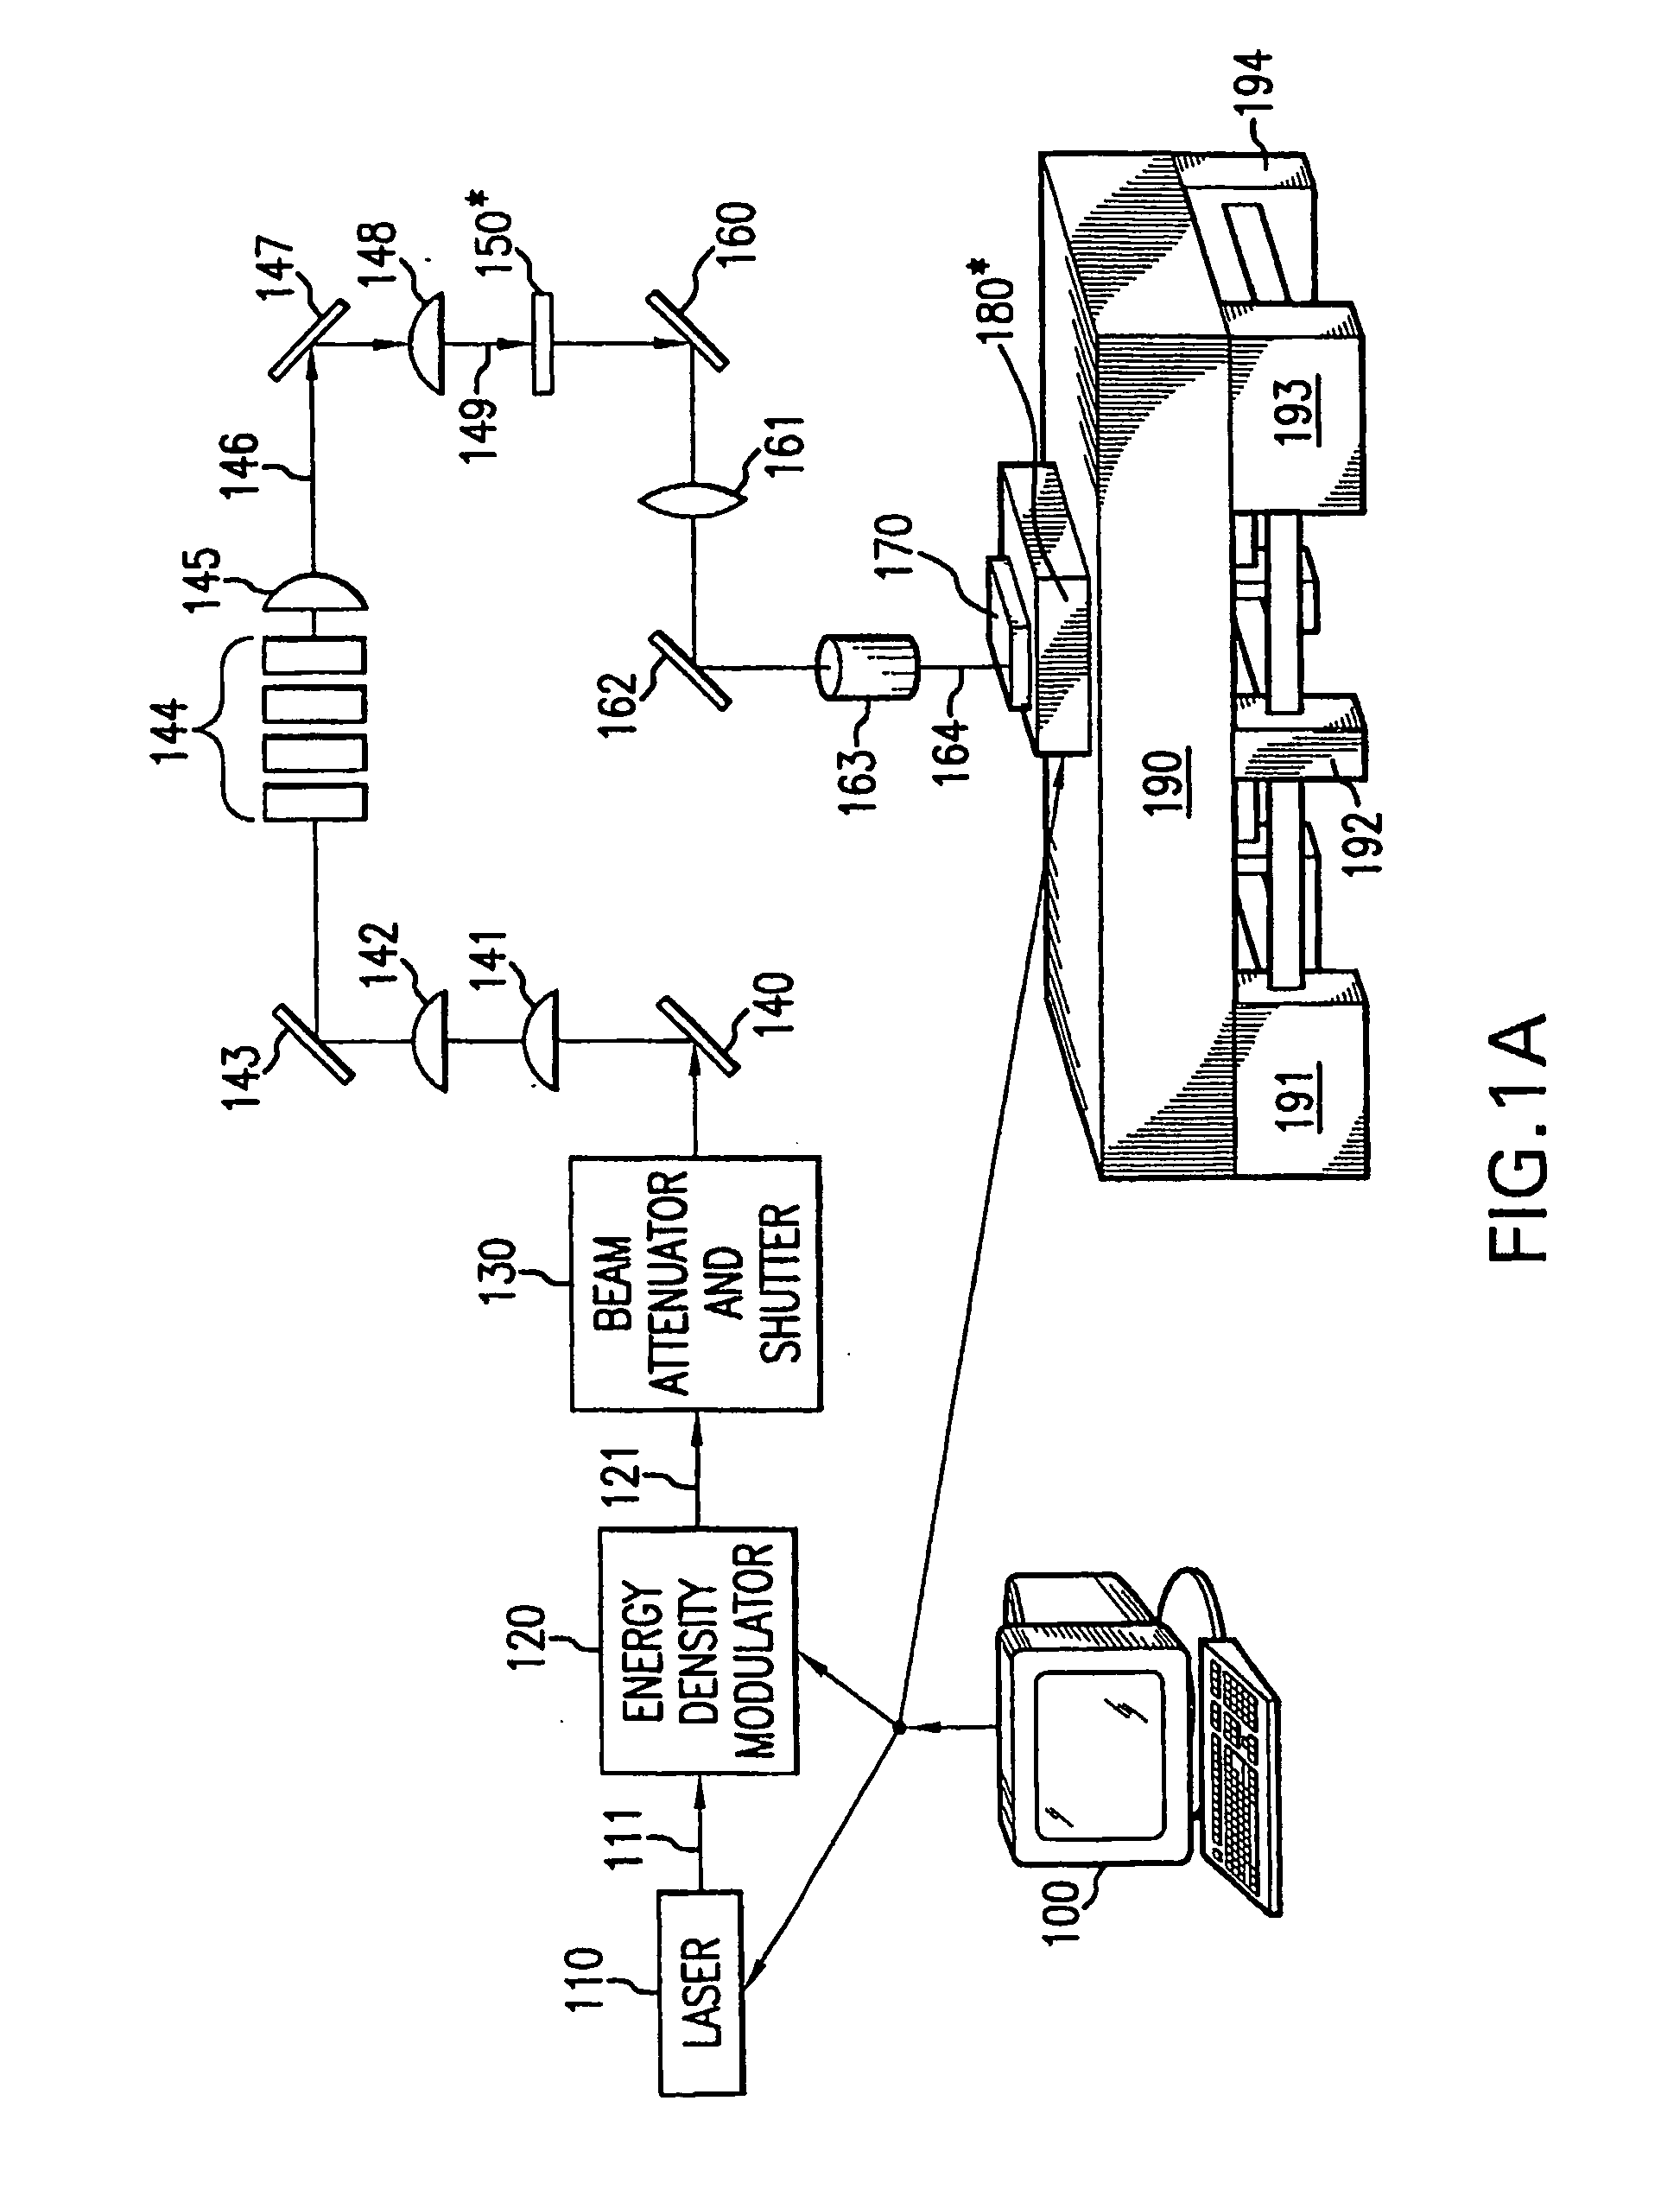 Processes and systems for laser crystallization processing of film regions on a substrate utilizing a line-type beam, and structures of such film regions